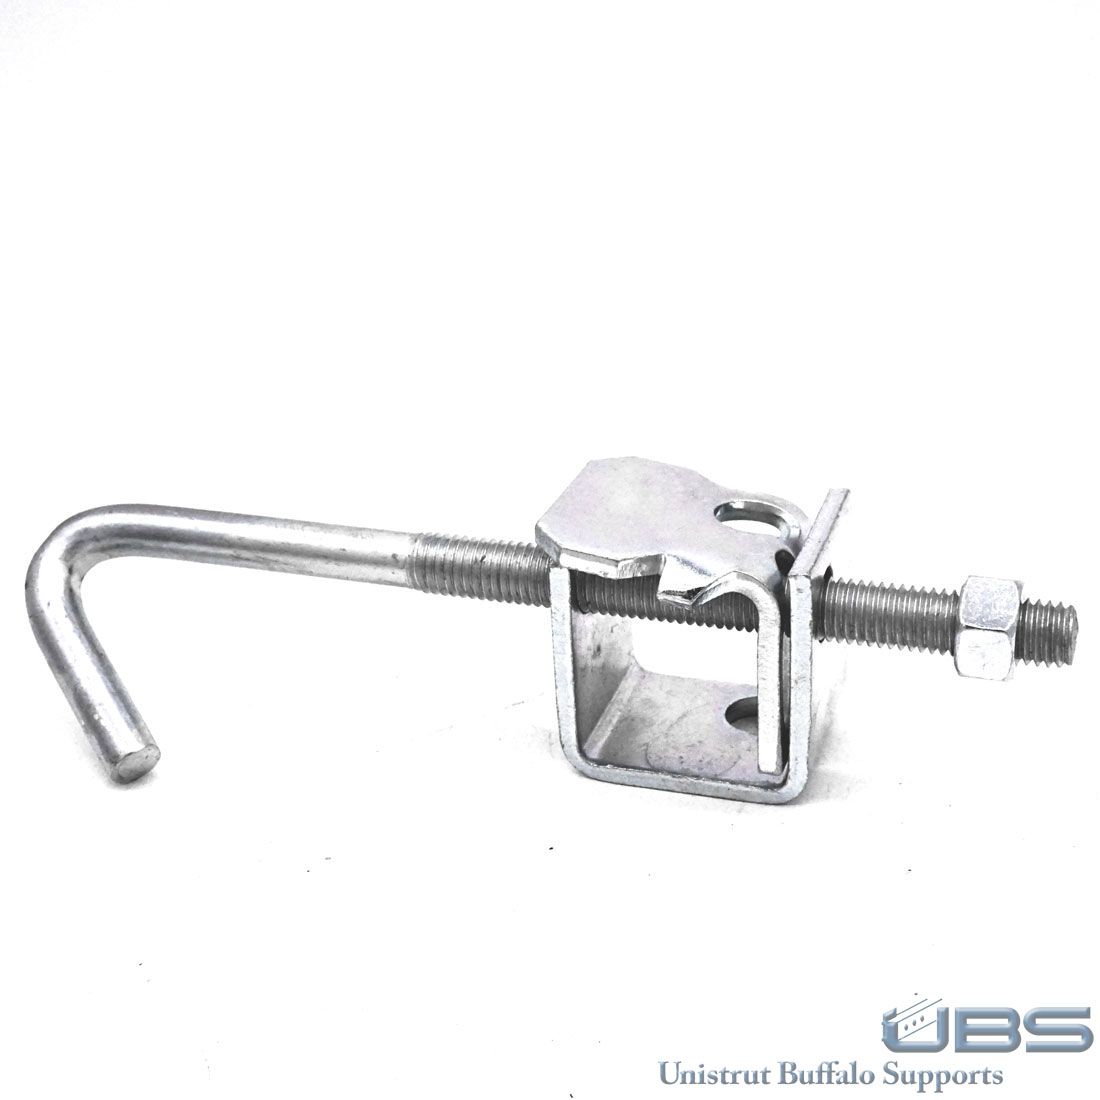 unistrut clamps and hangers